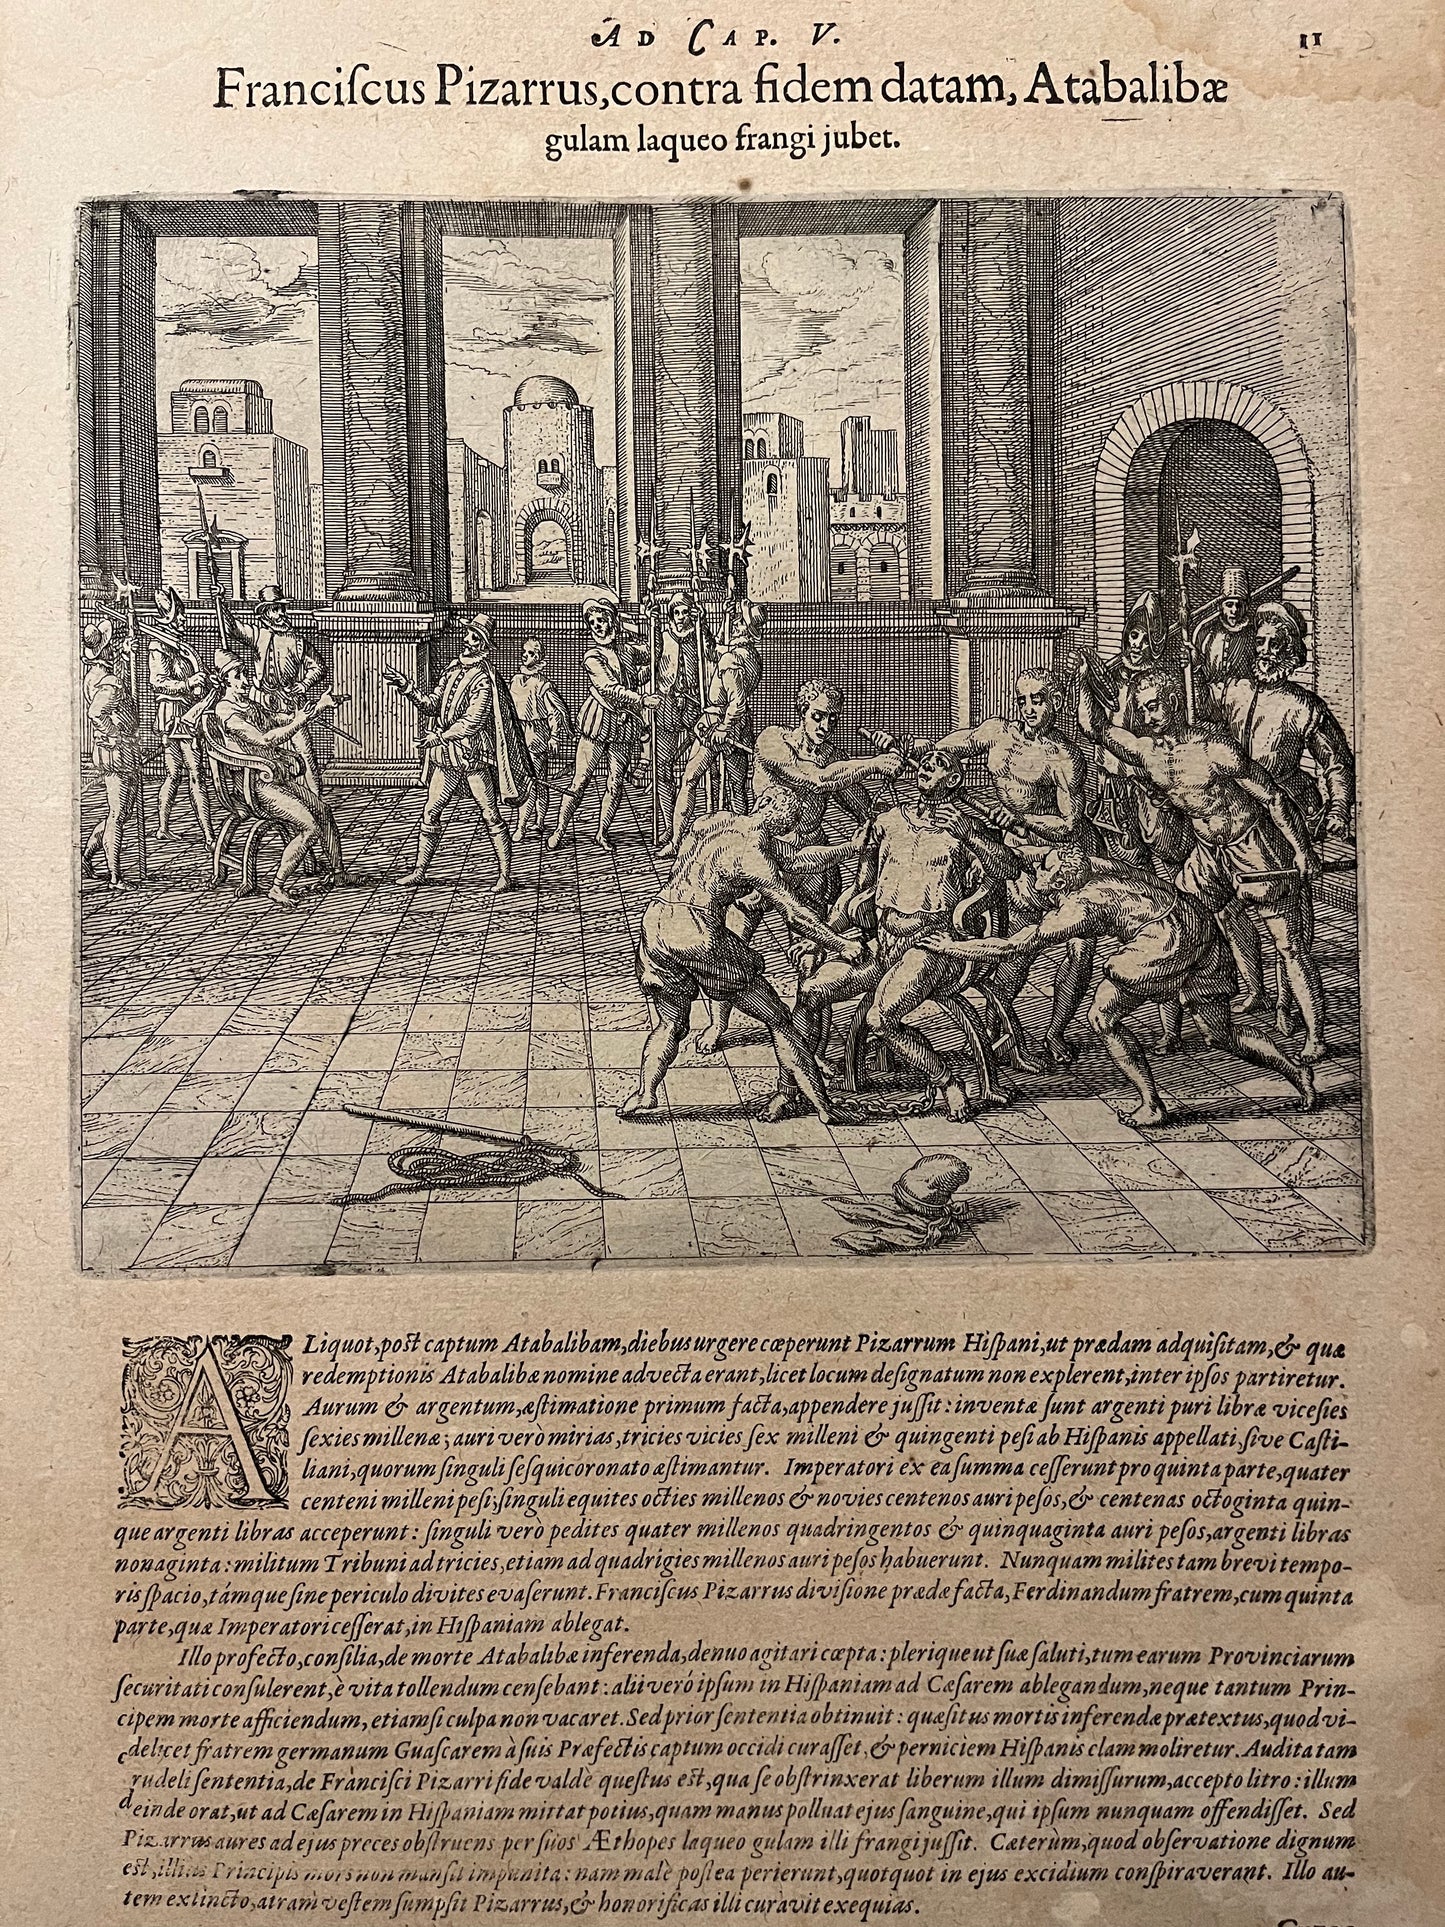 "Atahualpa is garrotted by the orders of Piazzaro" De Bry 1596